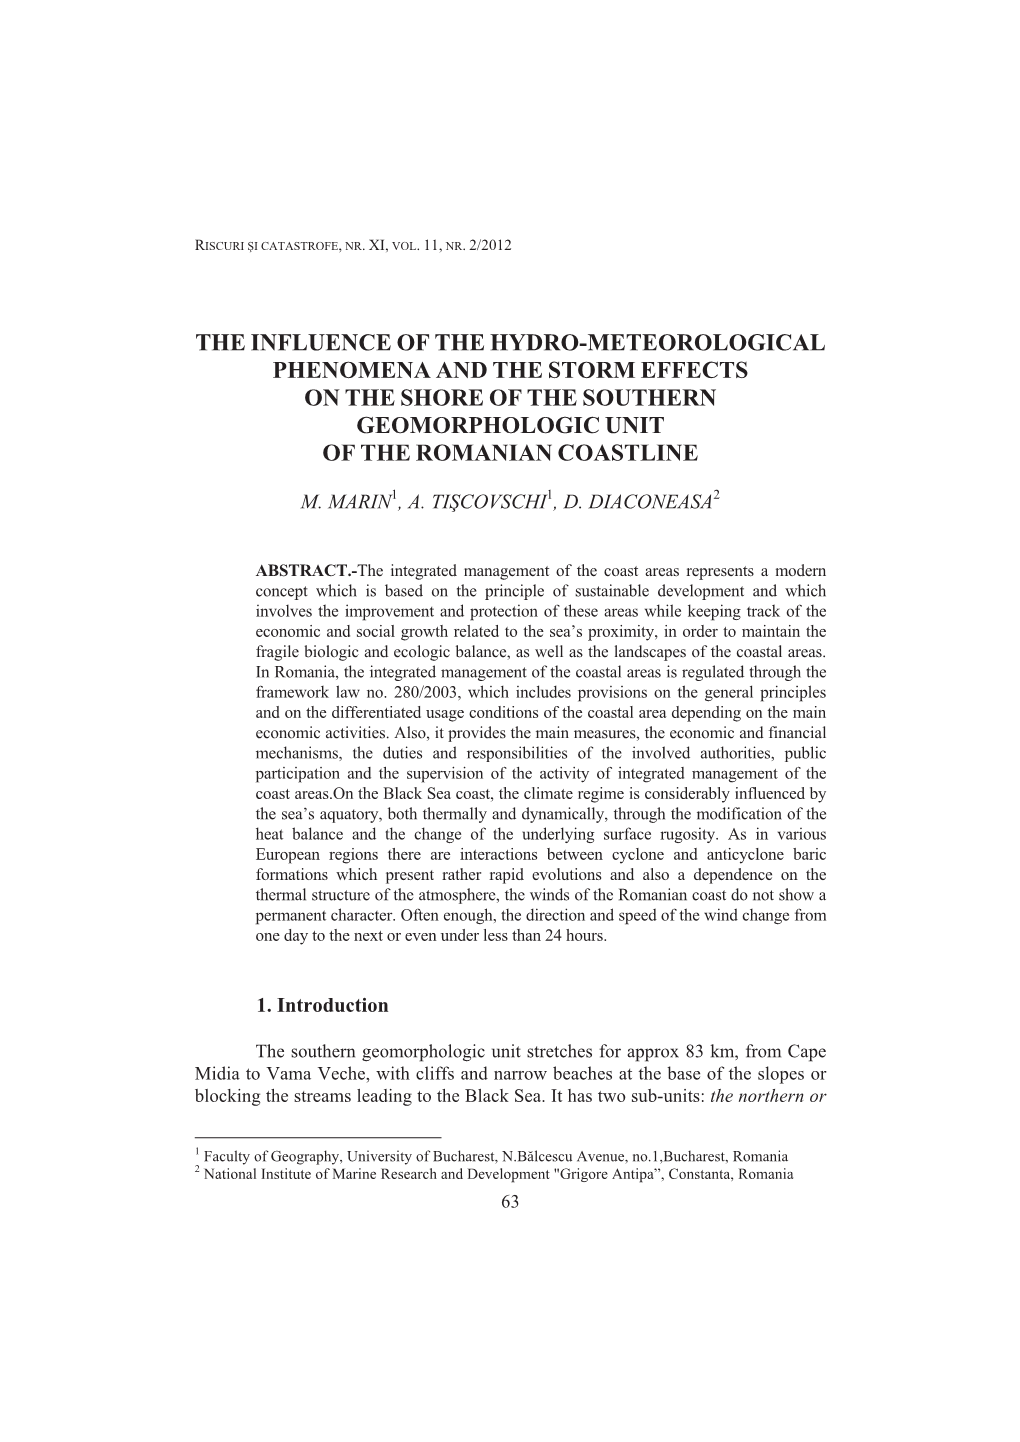 The Influence of the Hydro-Meteorological Phenomena and the Storm Effects on the Shore of the Southern Geomorphologic Unit of the Romanian Coastline